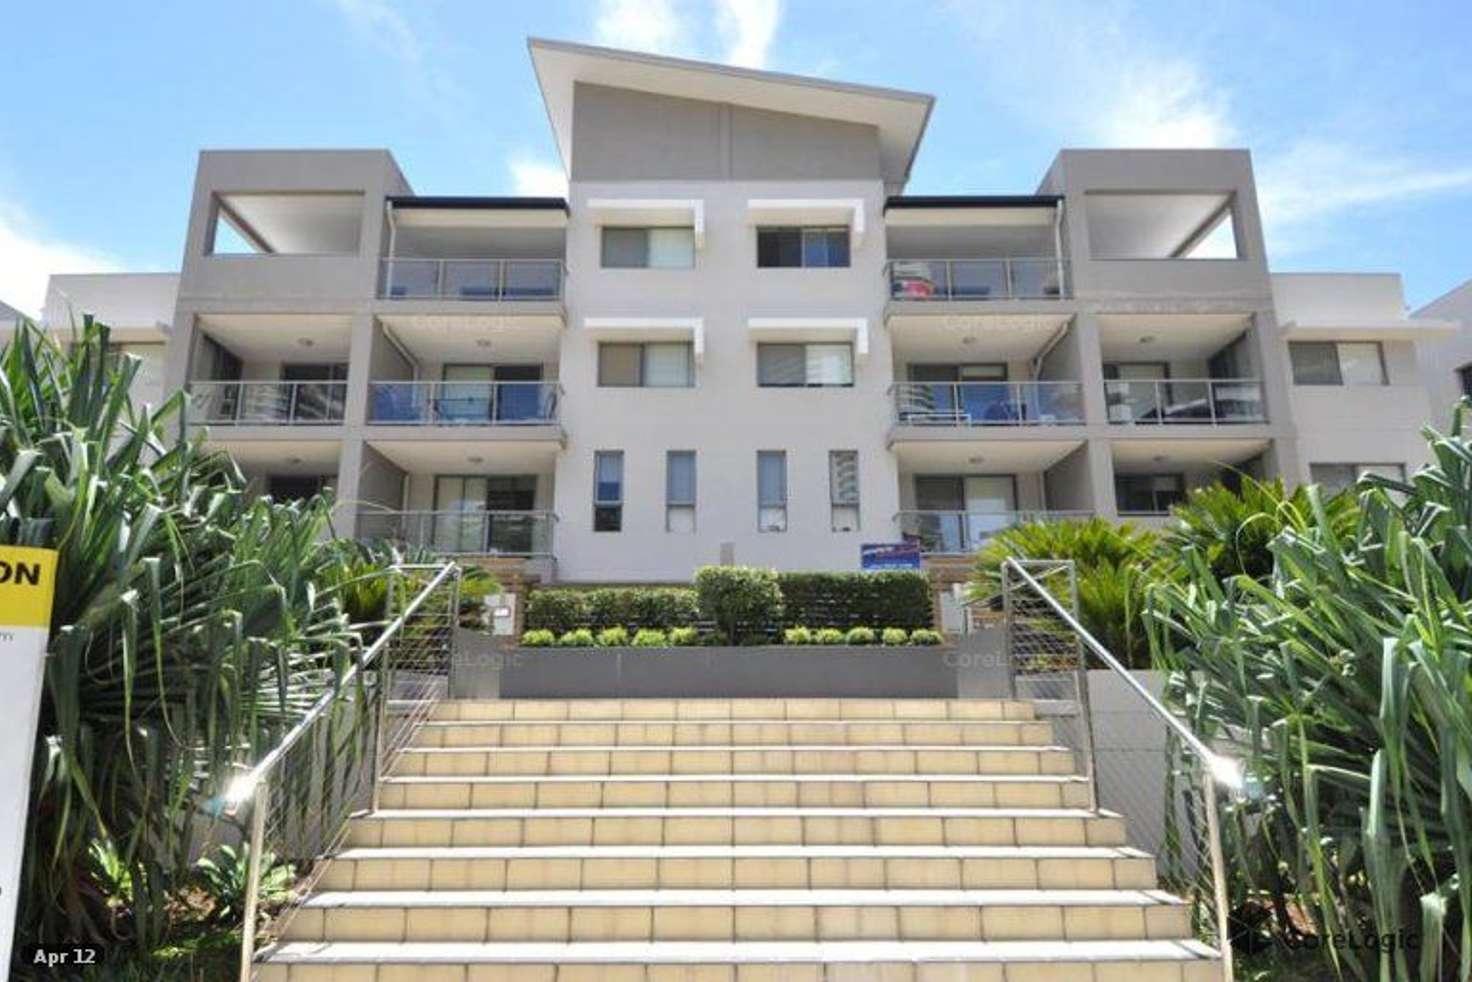 Main view of Homely unit listing, 12/12-18 Bayview Street, Runaway Bay QLD 4216